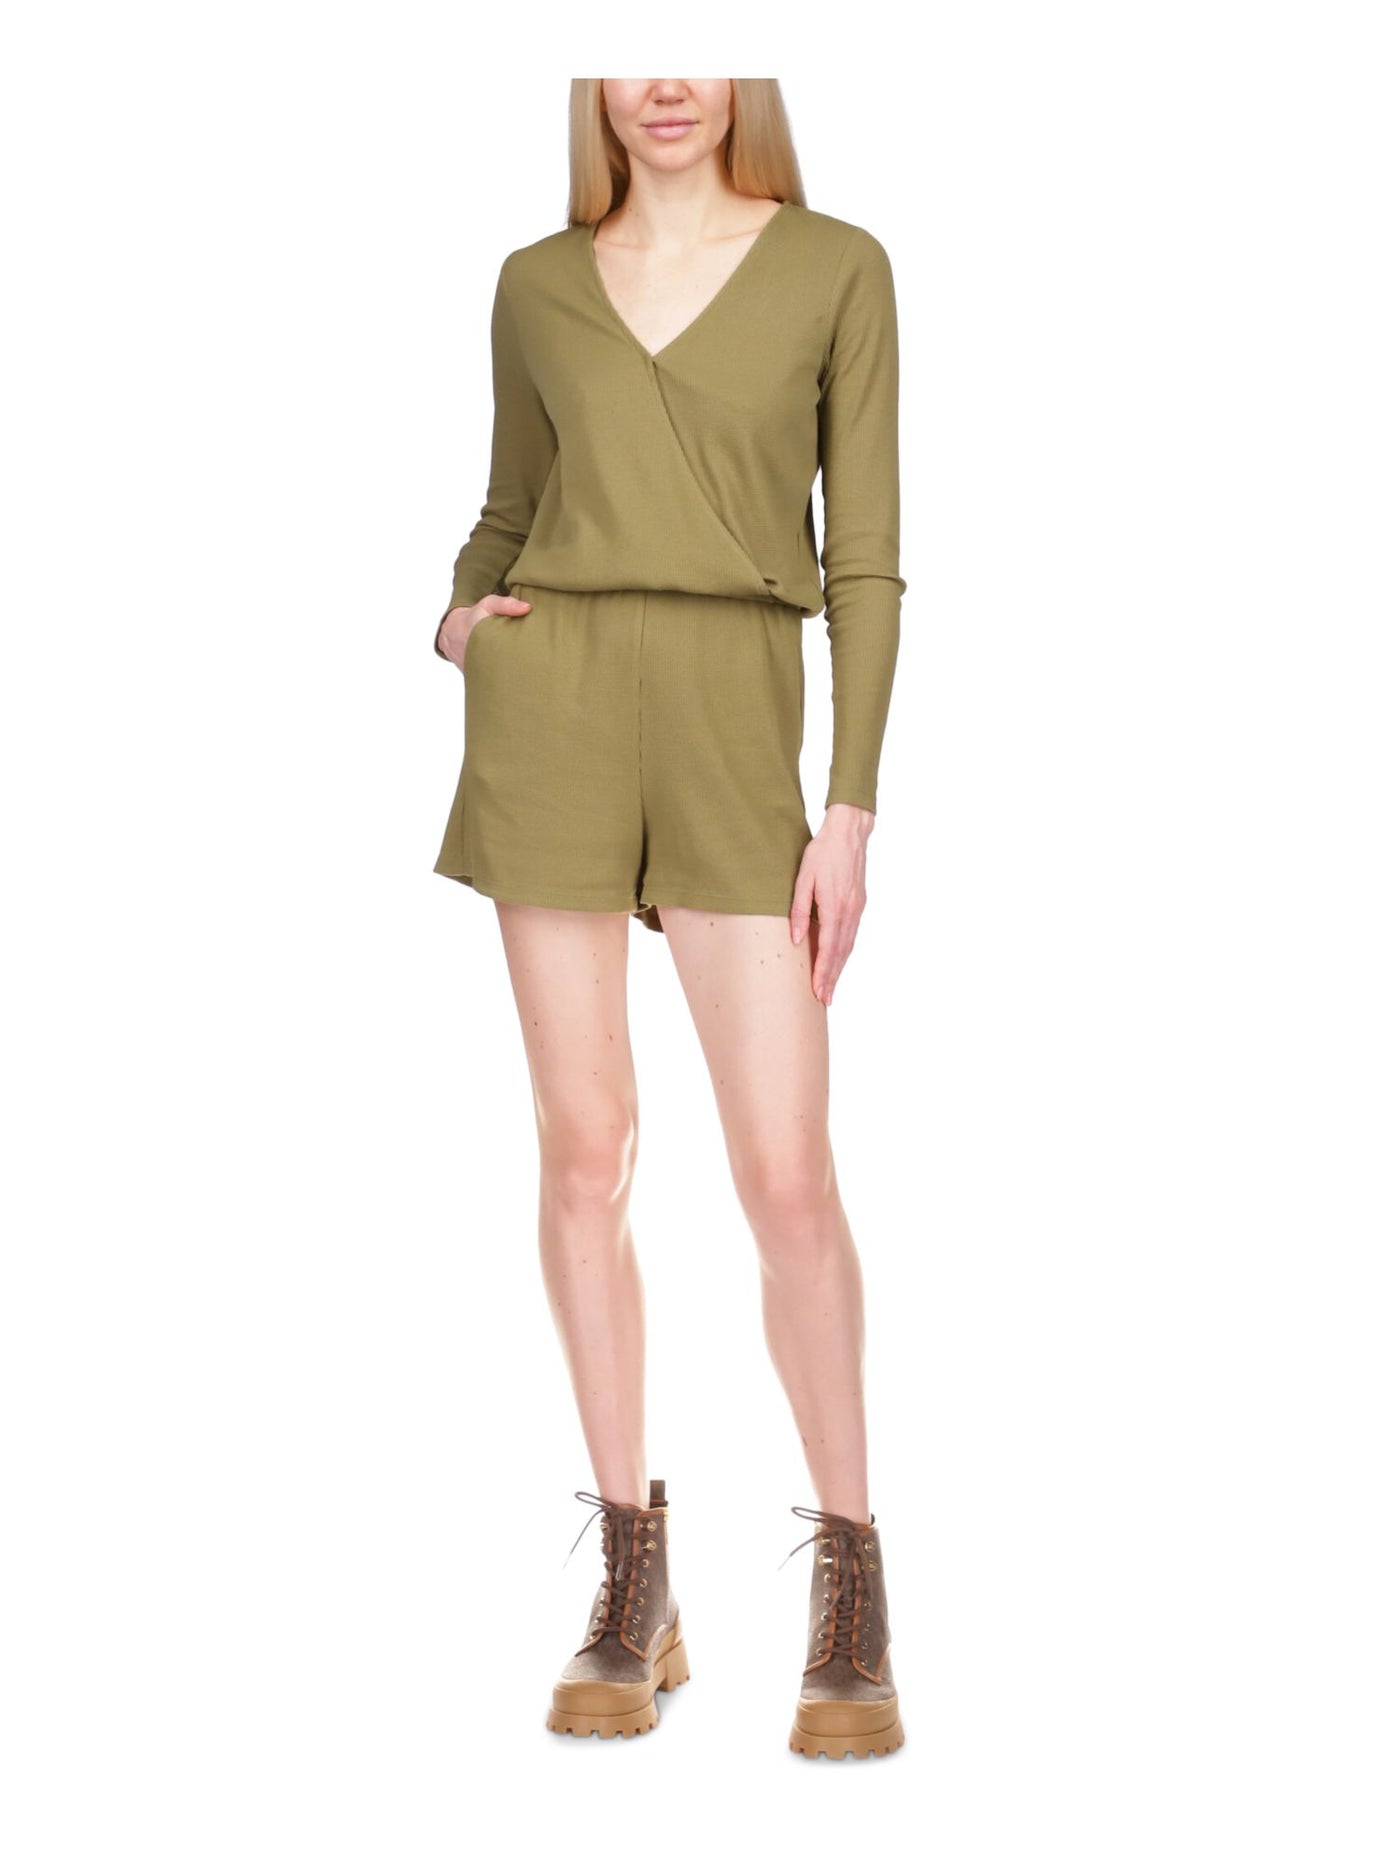 MICHAEL KORS Womens Green Ribbed Pocketed Pull-on Elastic Waist Long Sleeve Surplice Neckline Faux Wrap Shorts Romper M